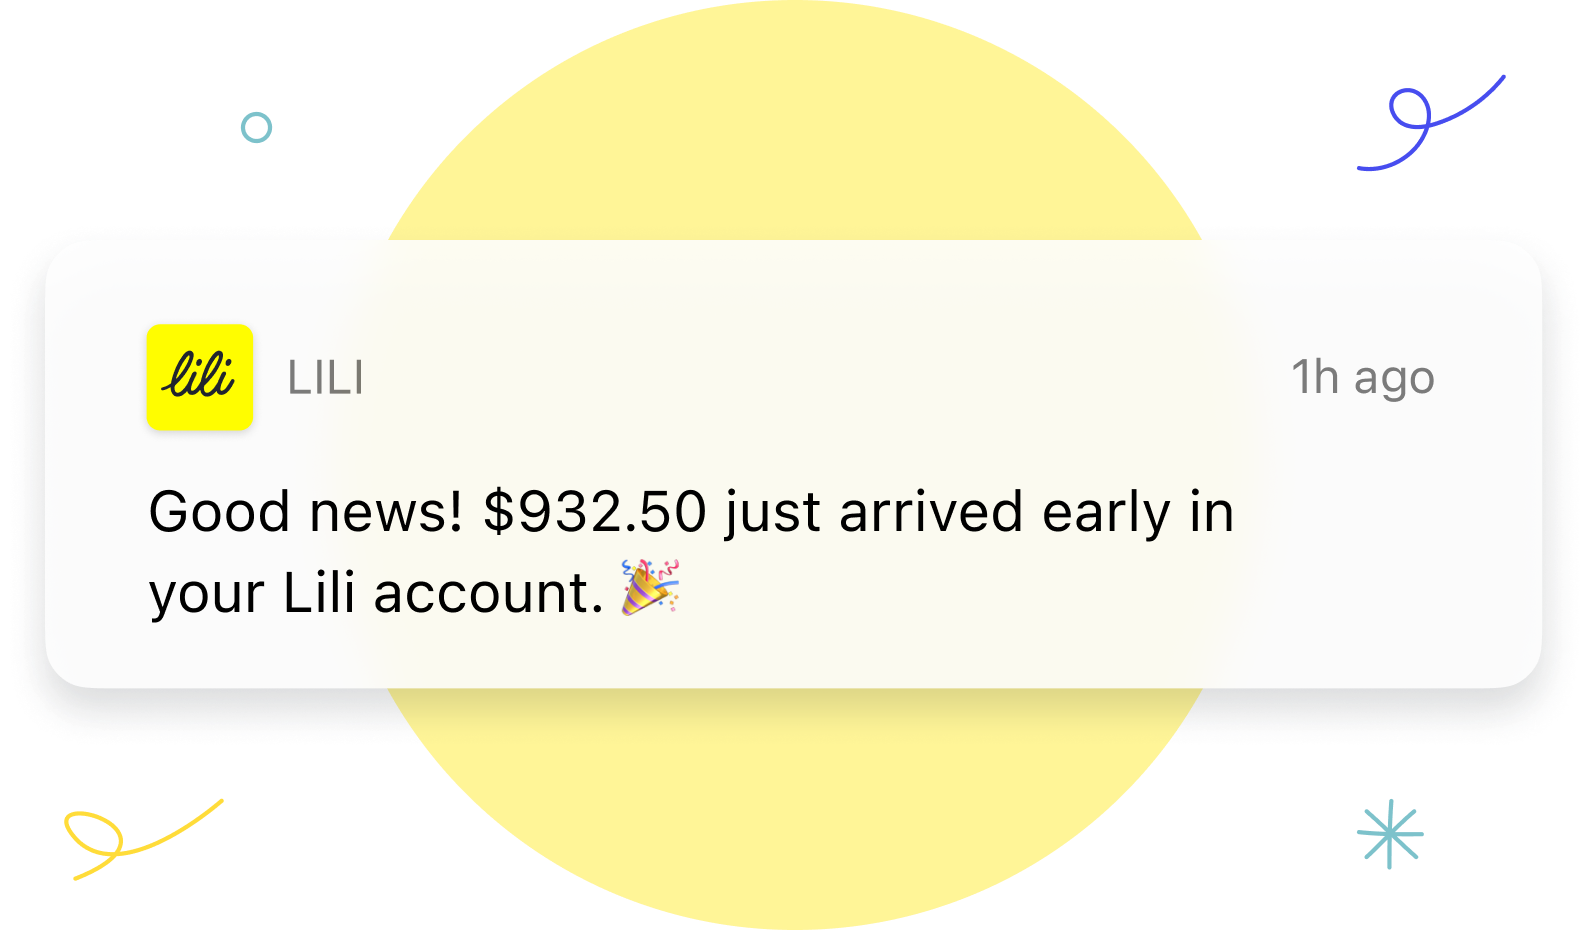 Get Paid Early with Lili by setting up direct deposit